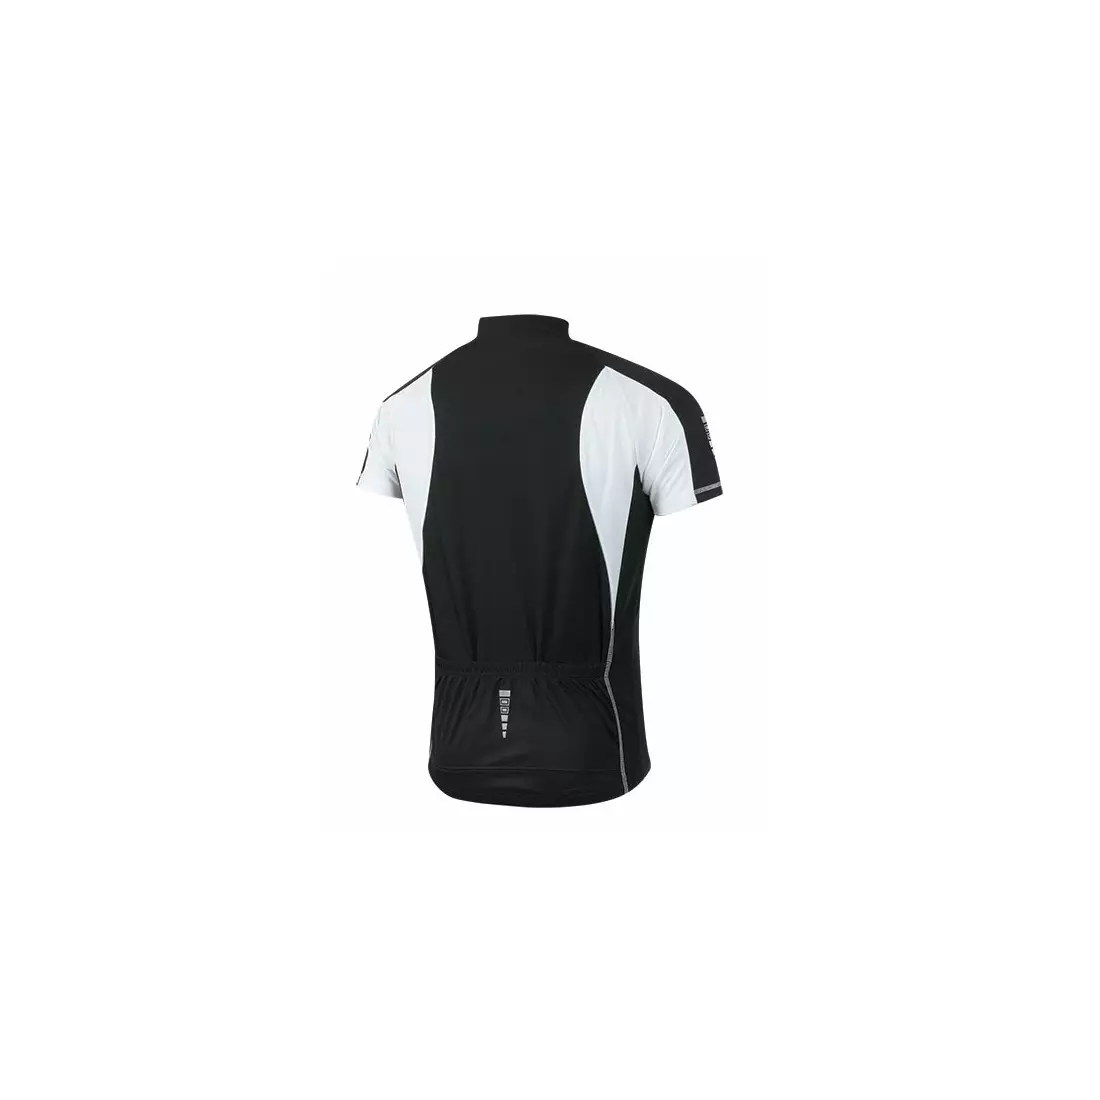 FORCE T10 cycling jersey black and white 900100